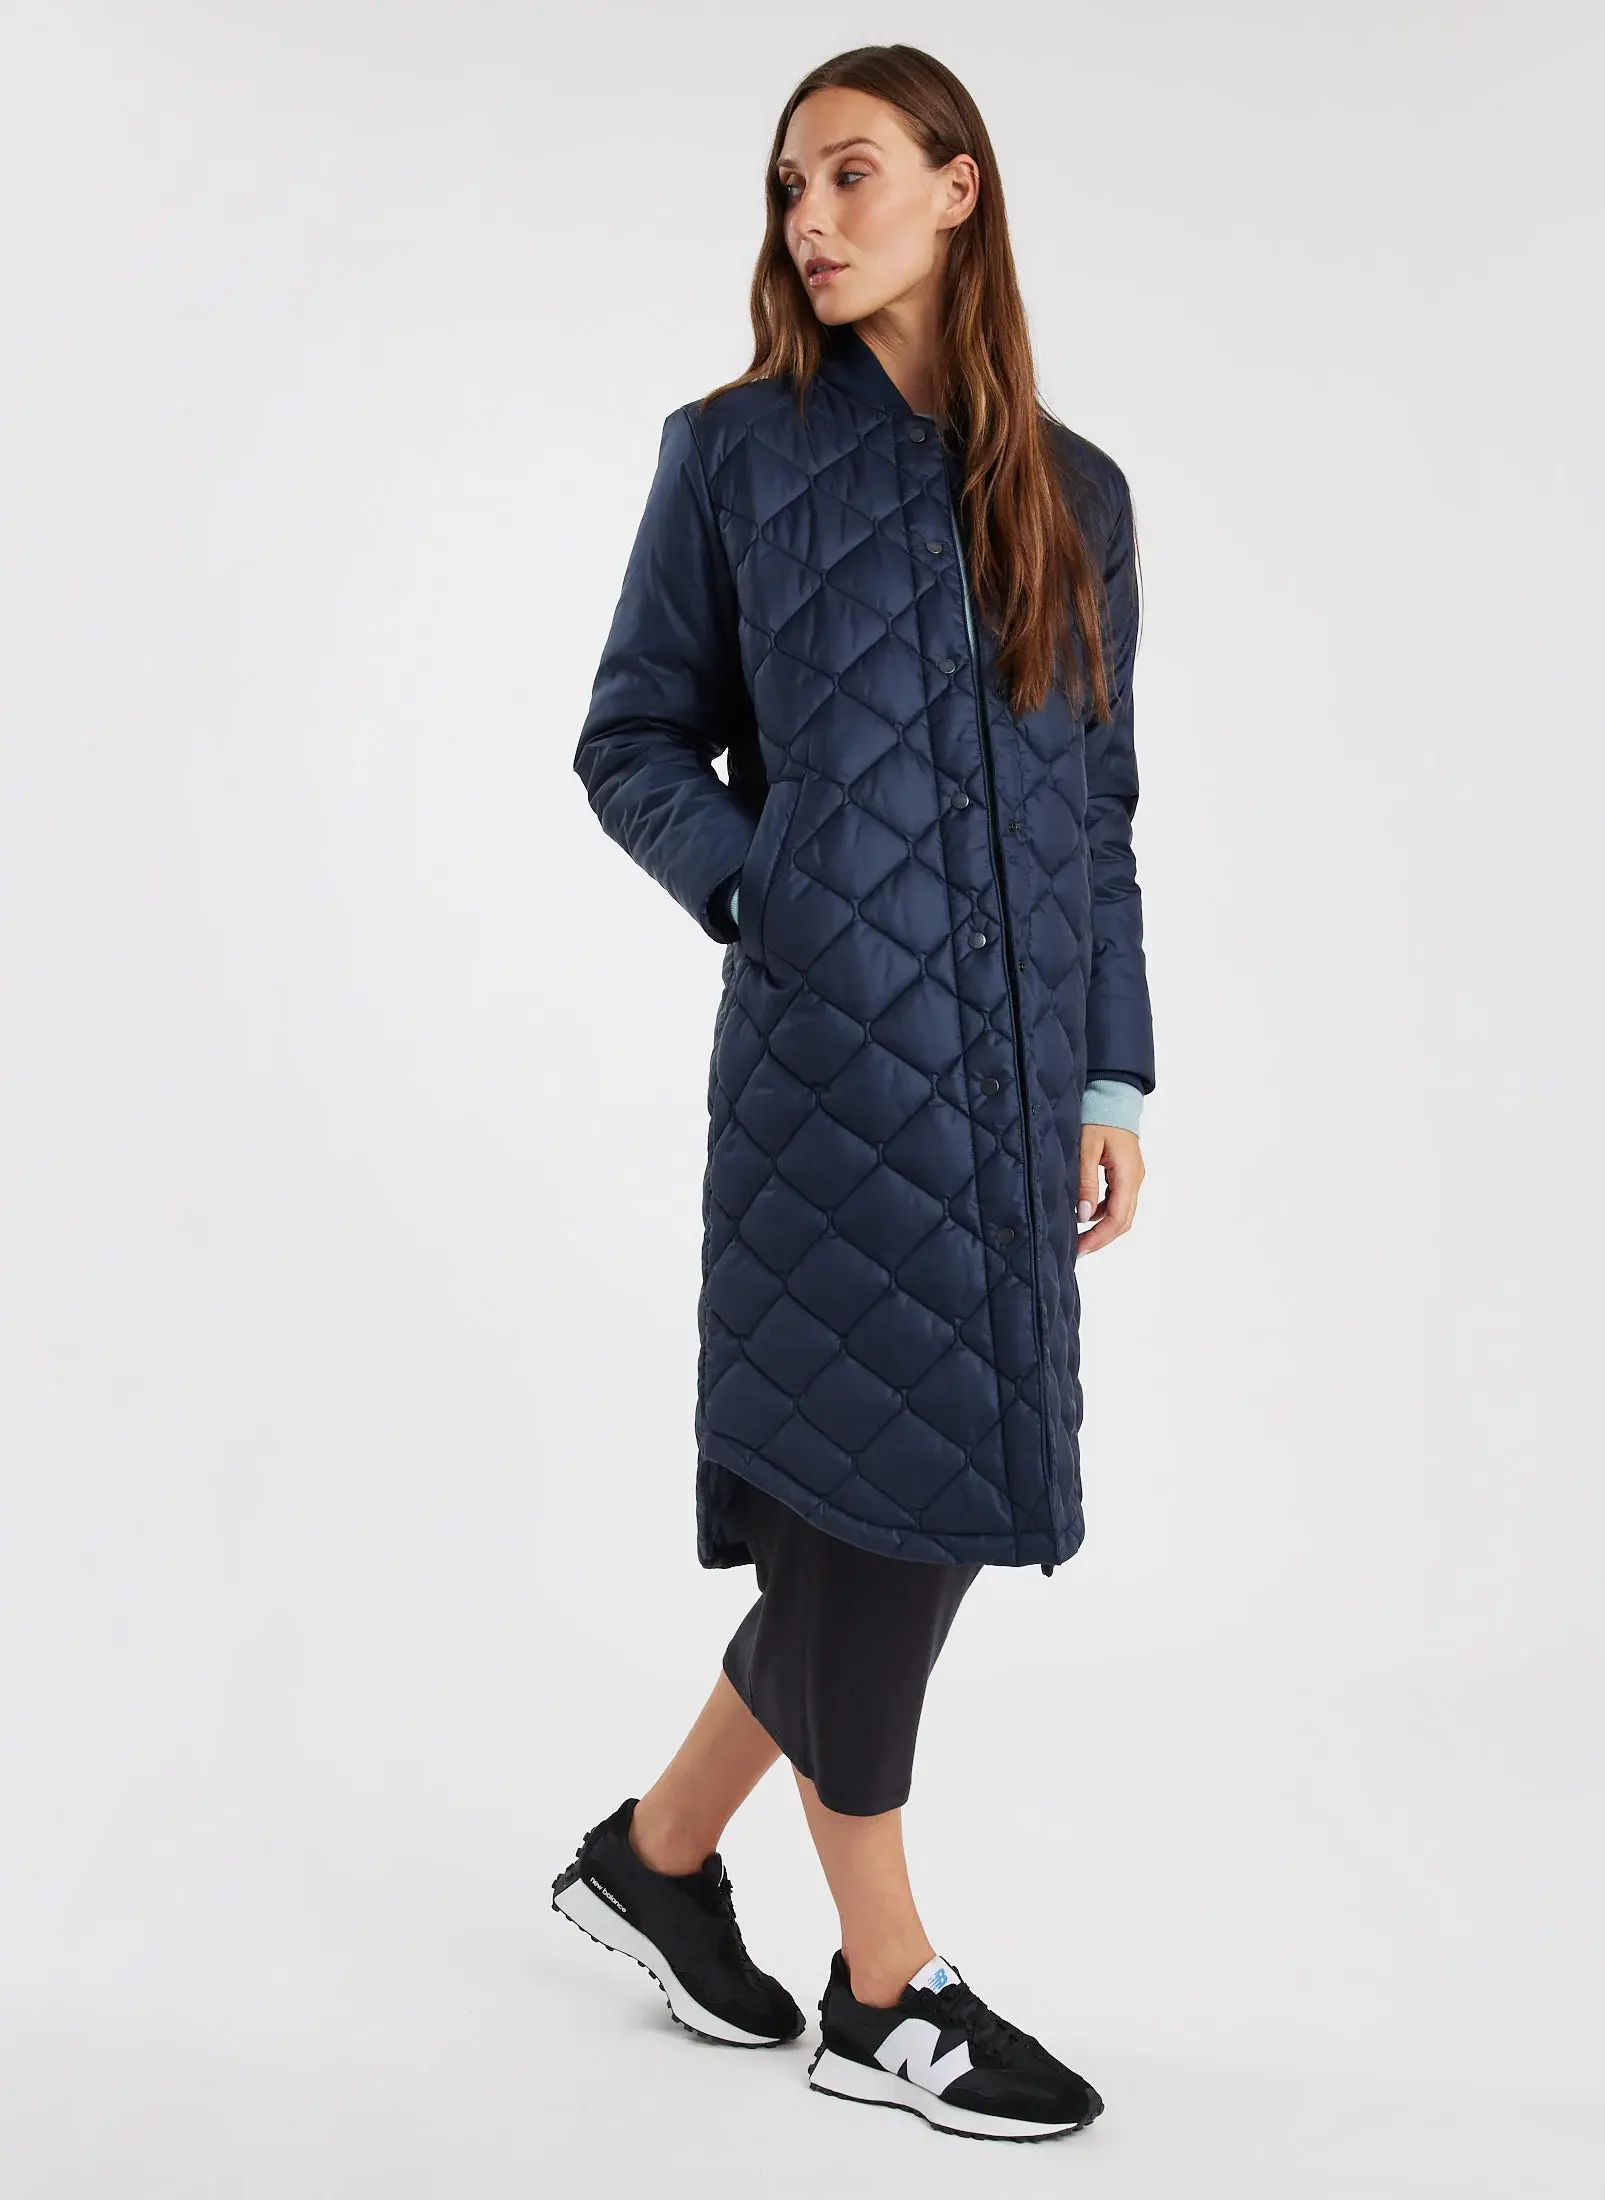 Kit And Ace All Day Long Puffer Jacket. 1